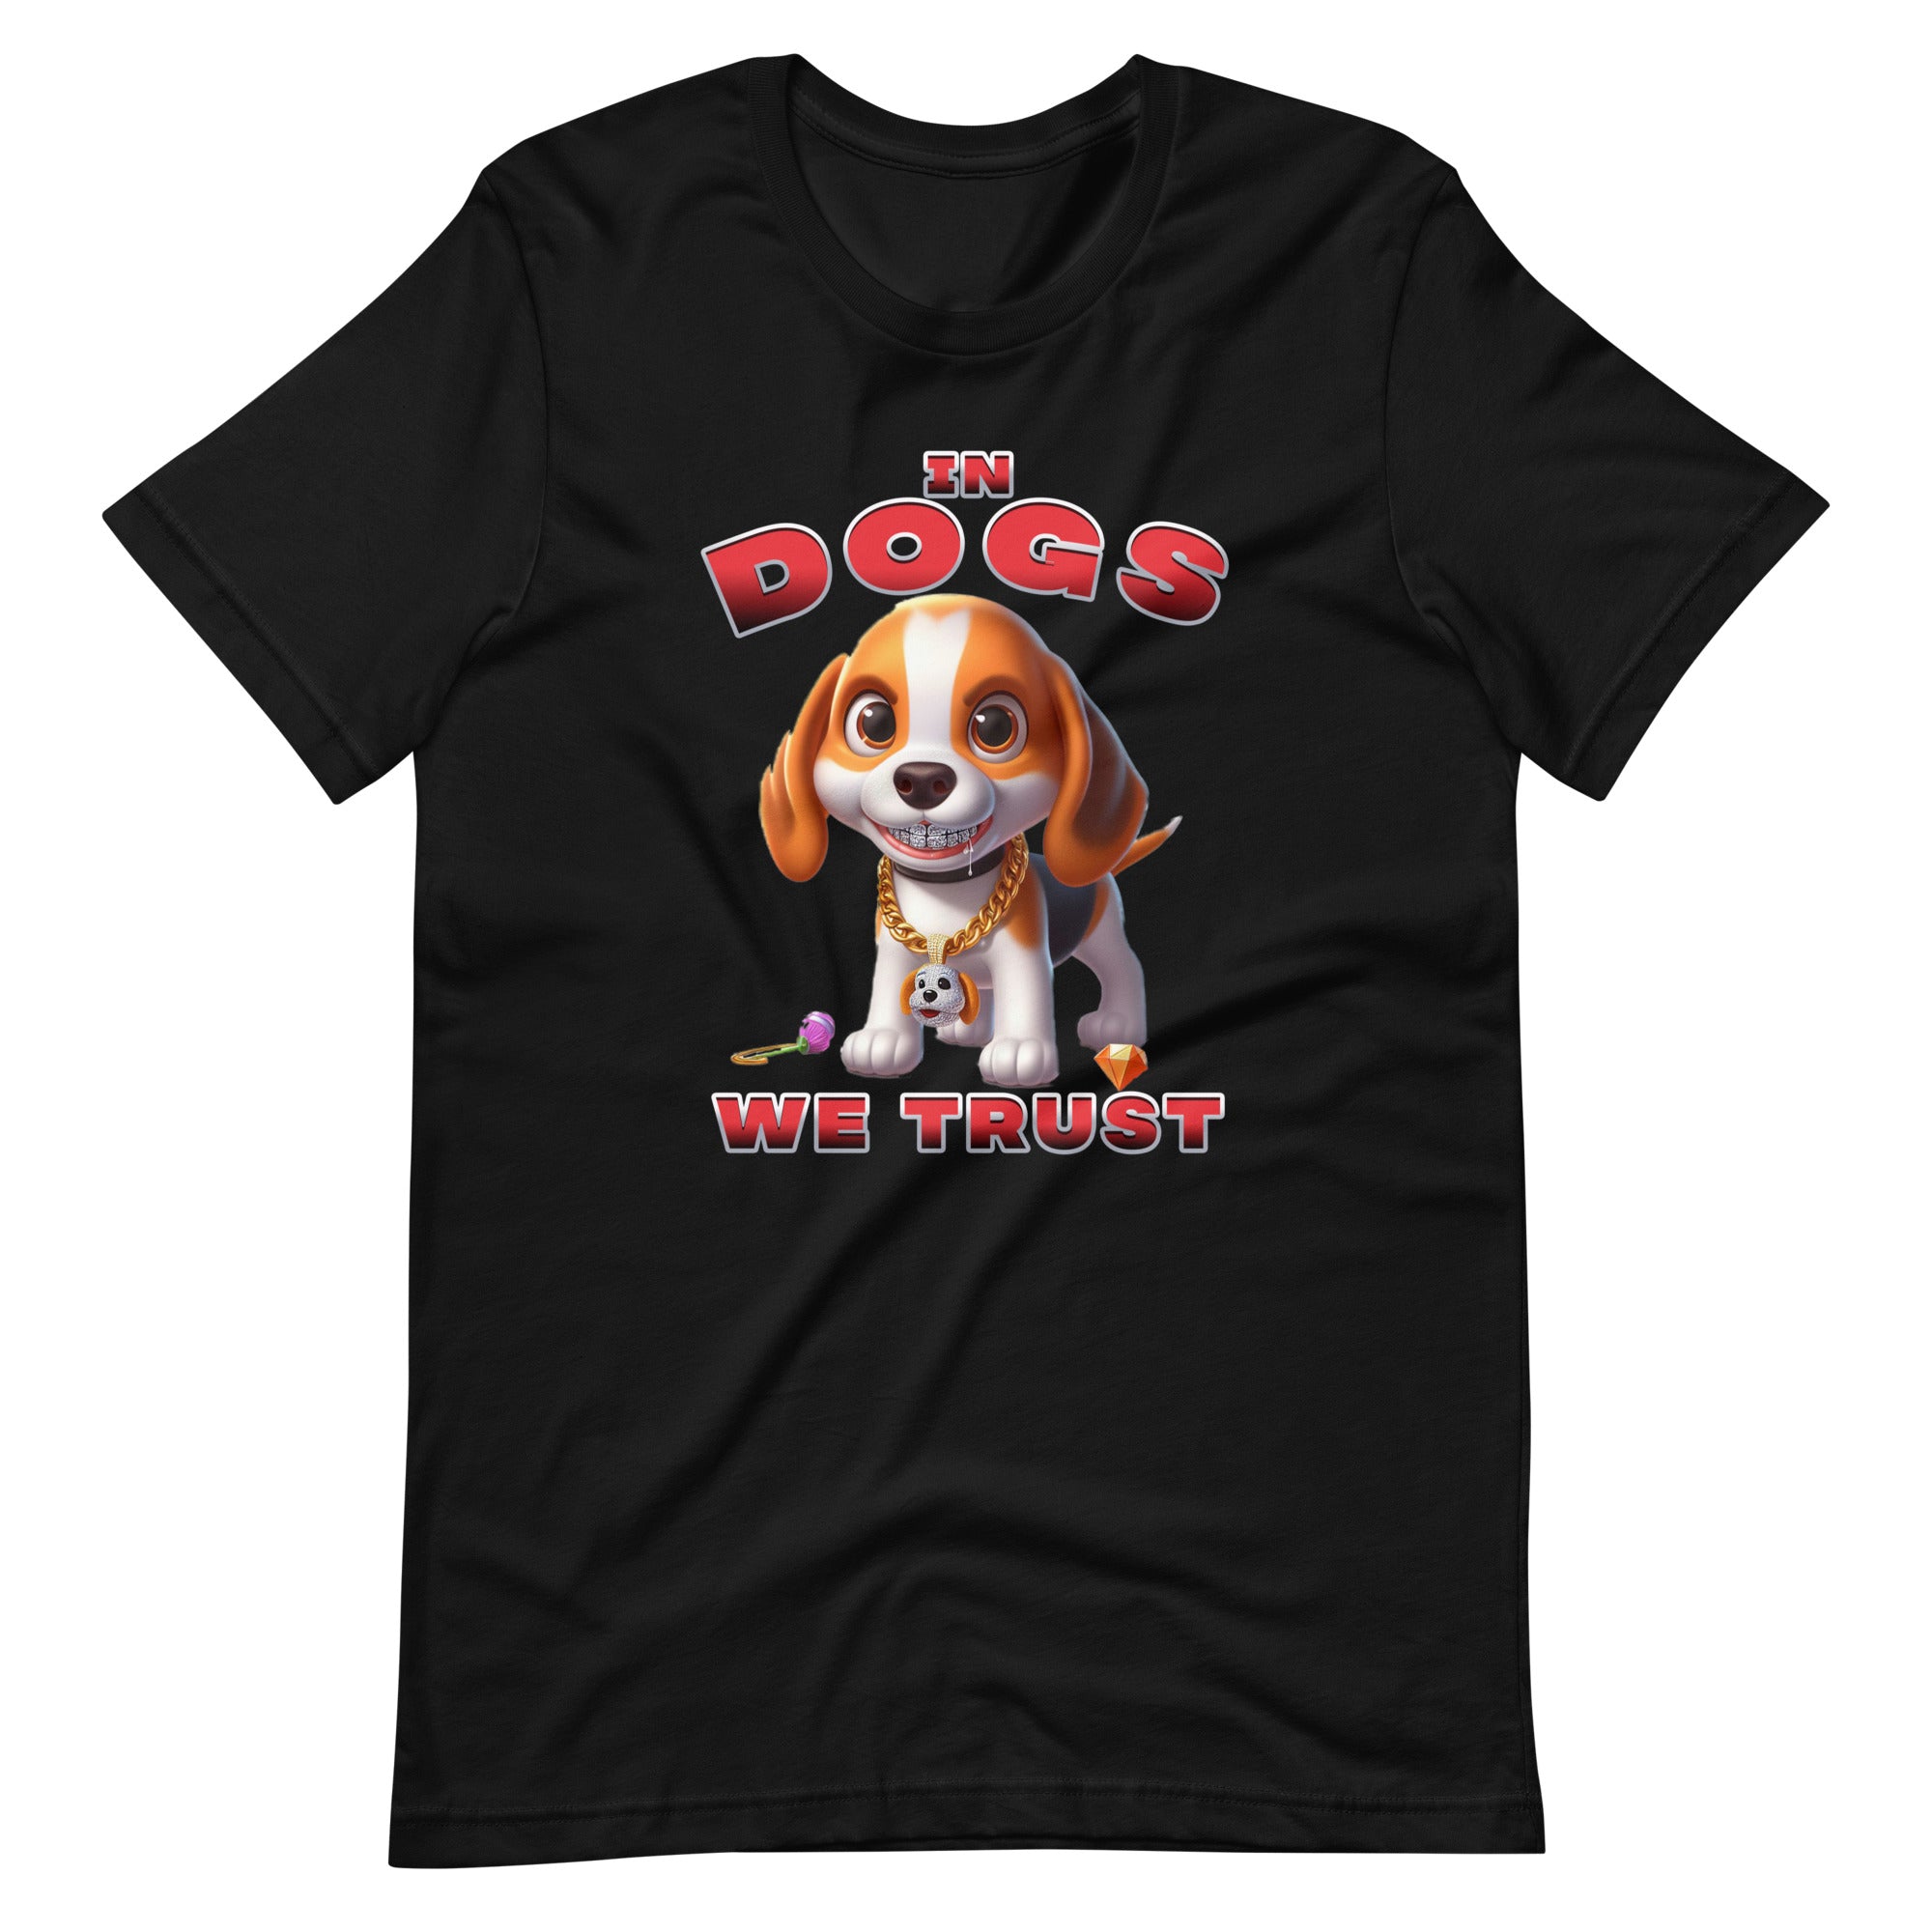 "In Dogs We Trust" T-shirt - Beagle